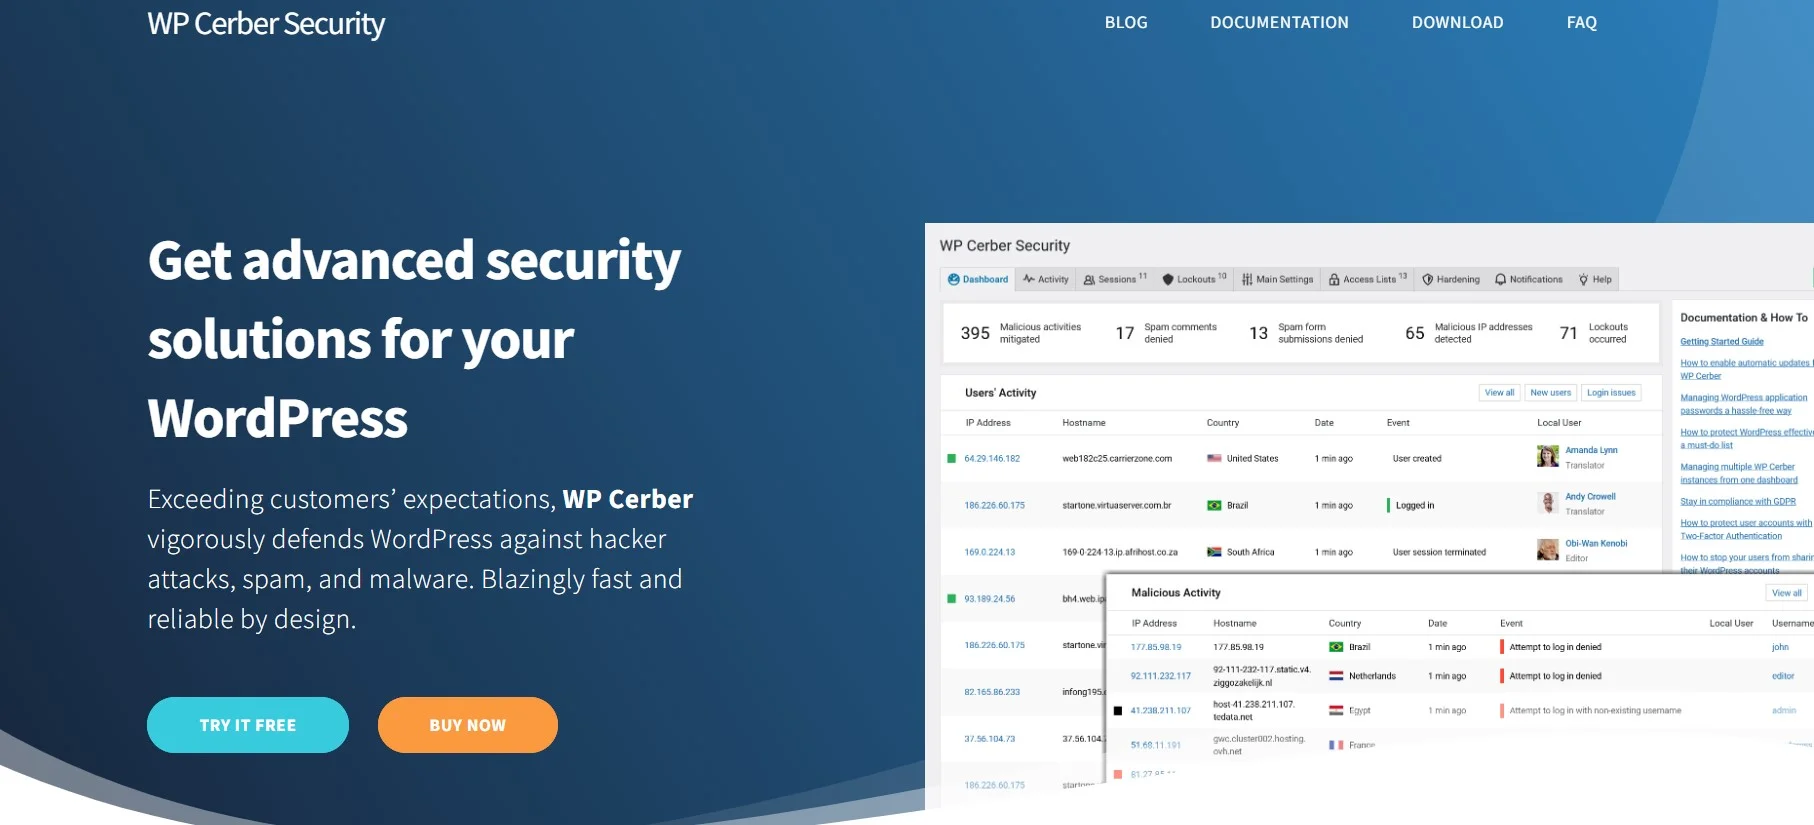 Wp Cerber Security Plugin Offers A Range Of Features To Defend Against Brute Force Attacks And Keep Your Site Safe